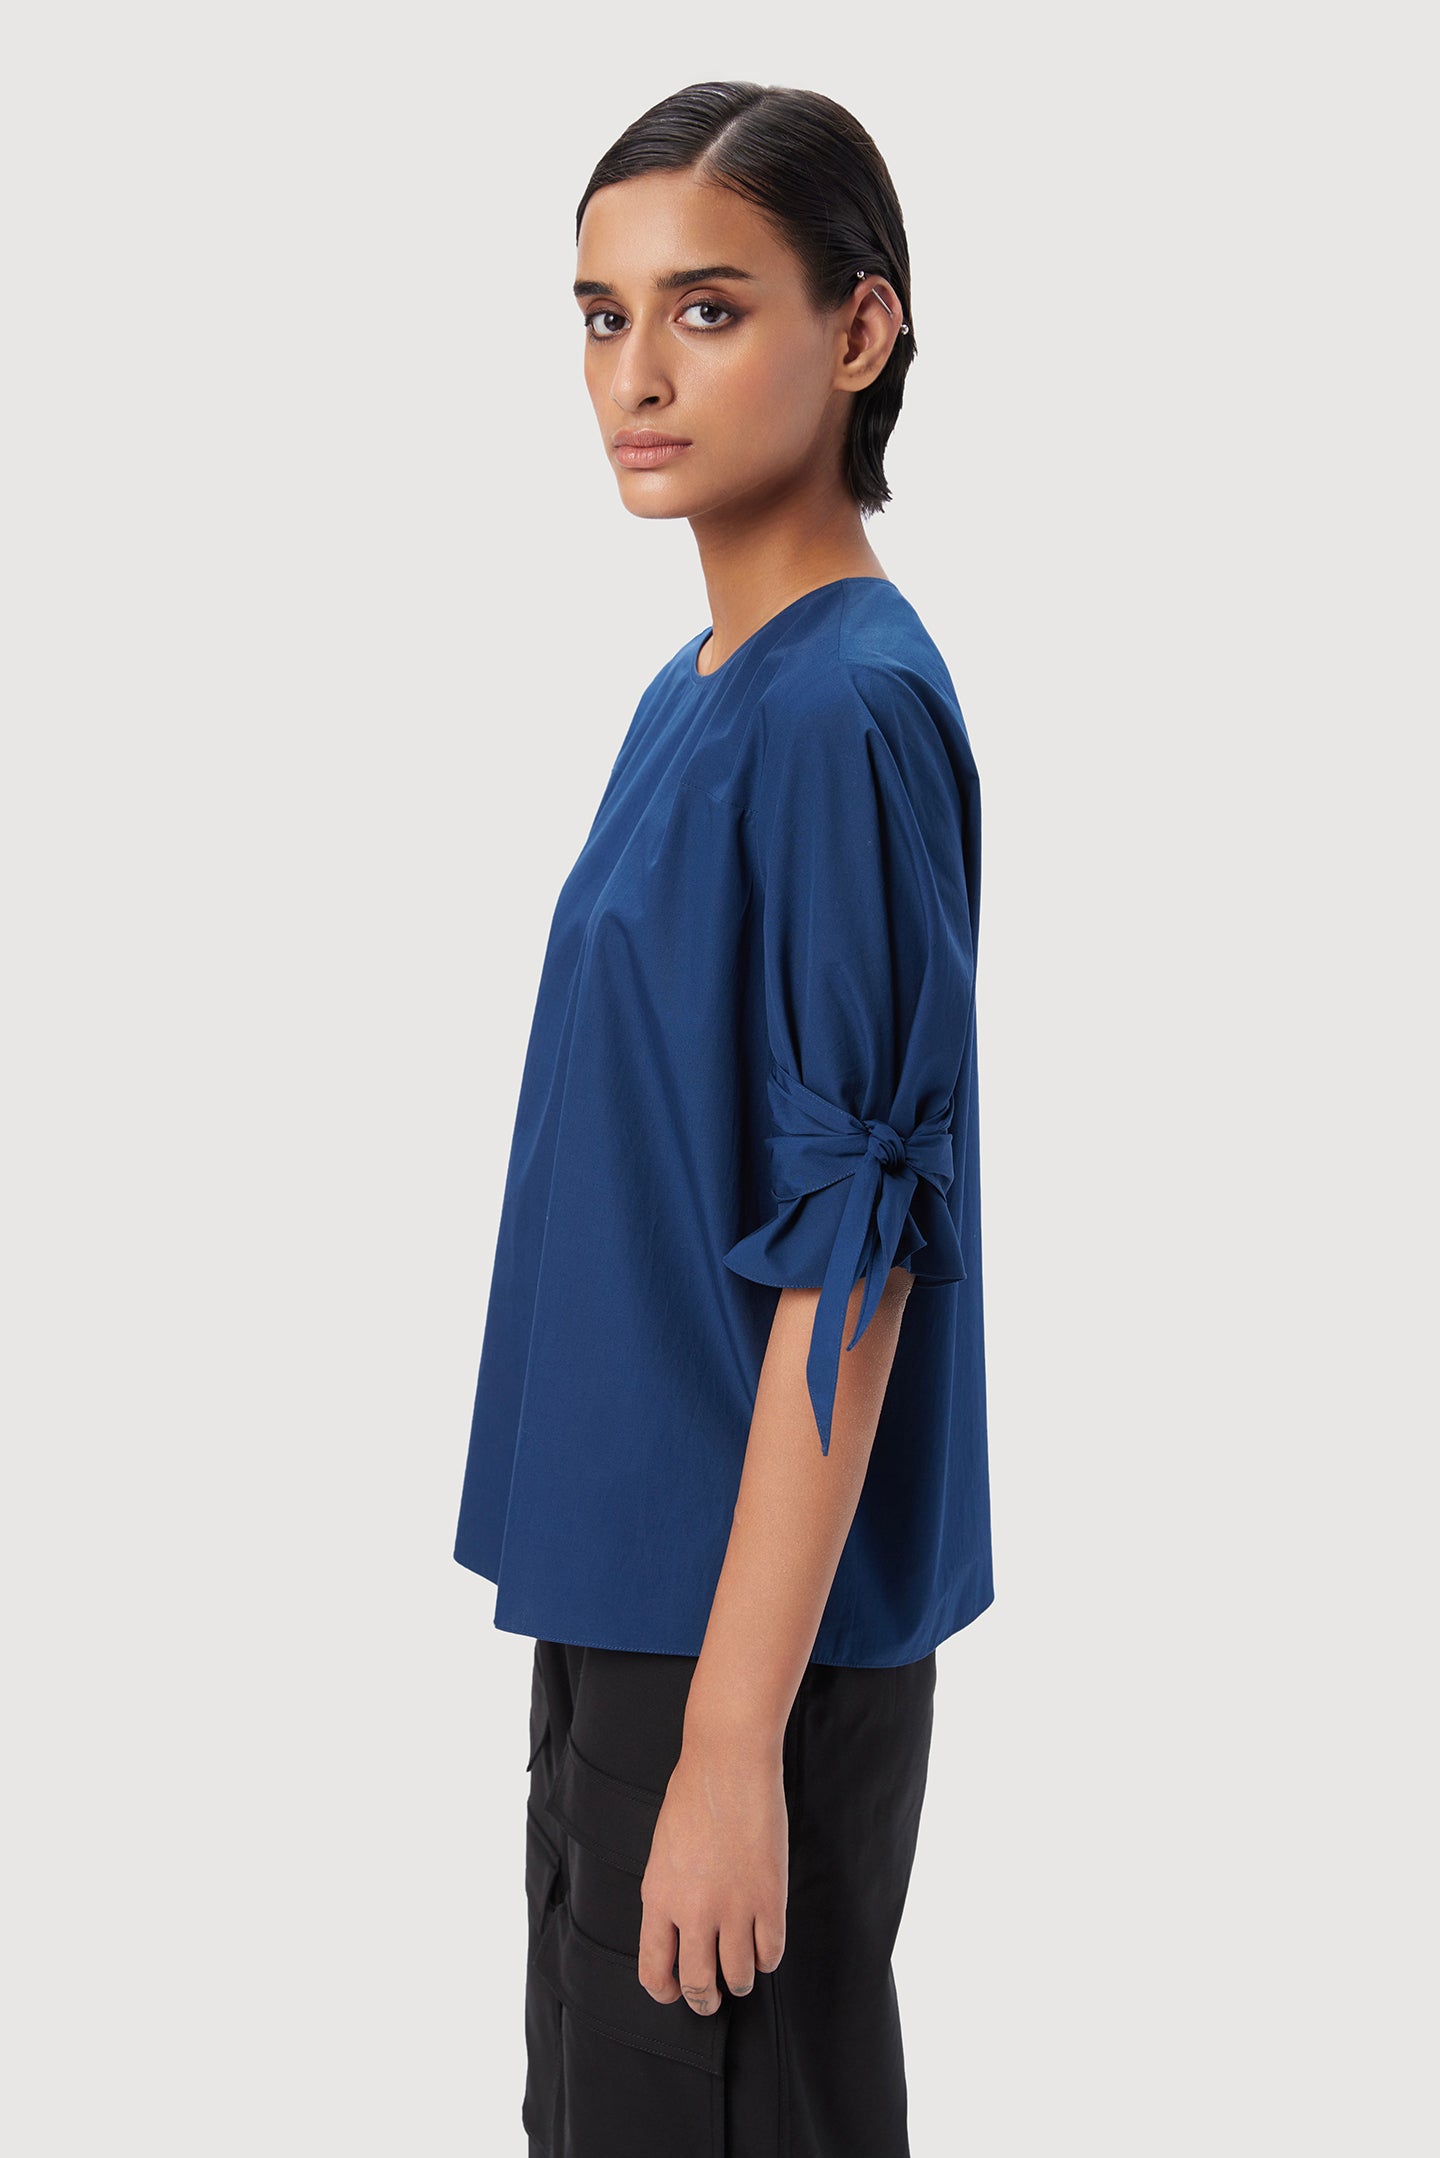 Straight Fit Round Neck Top